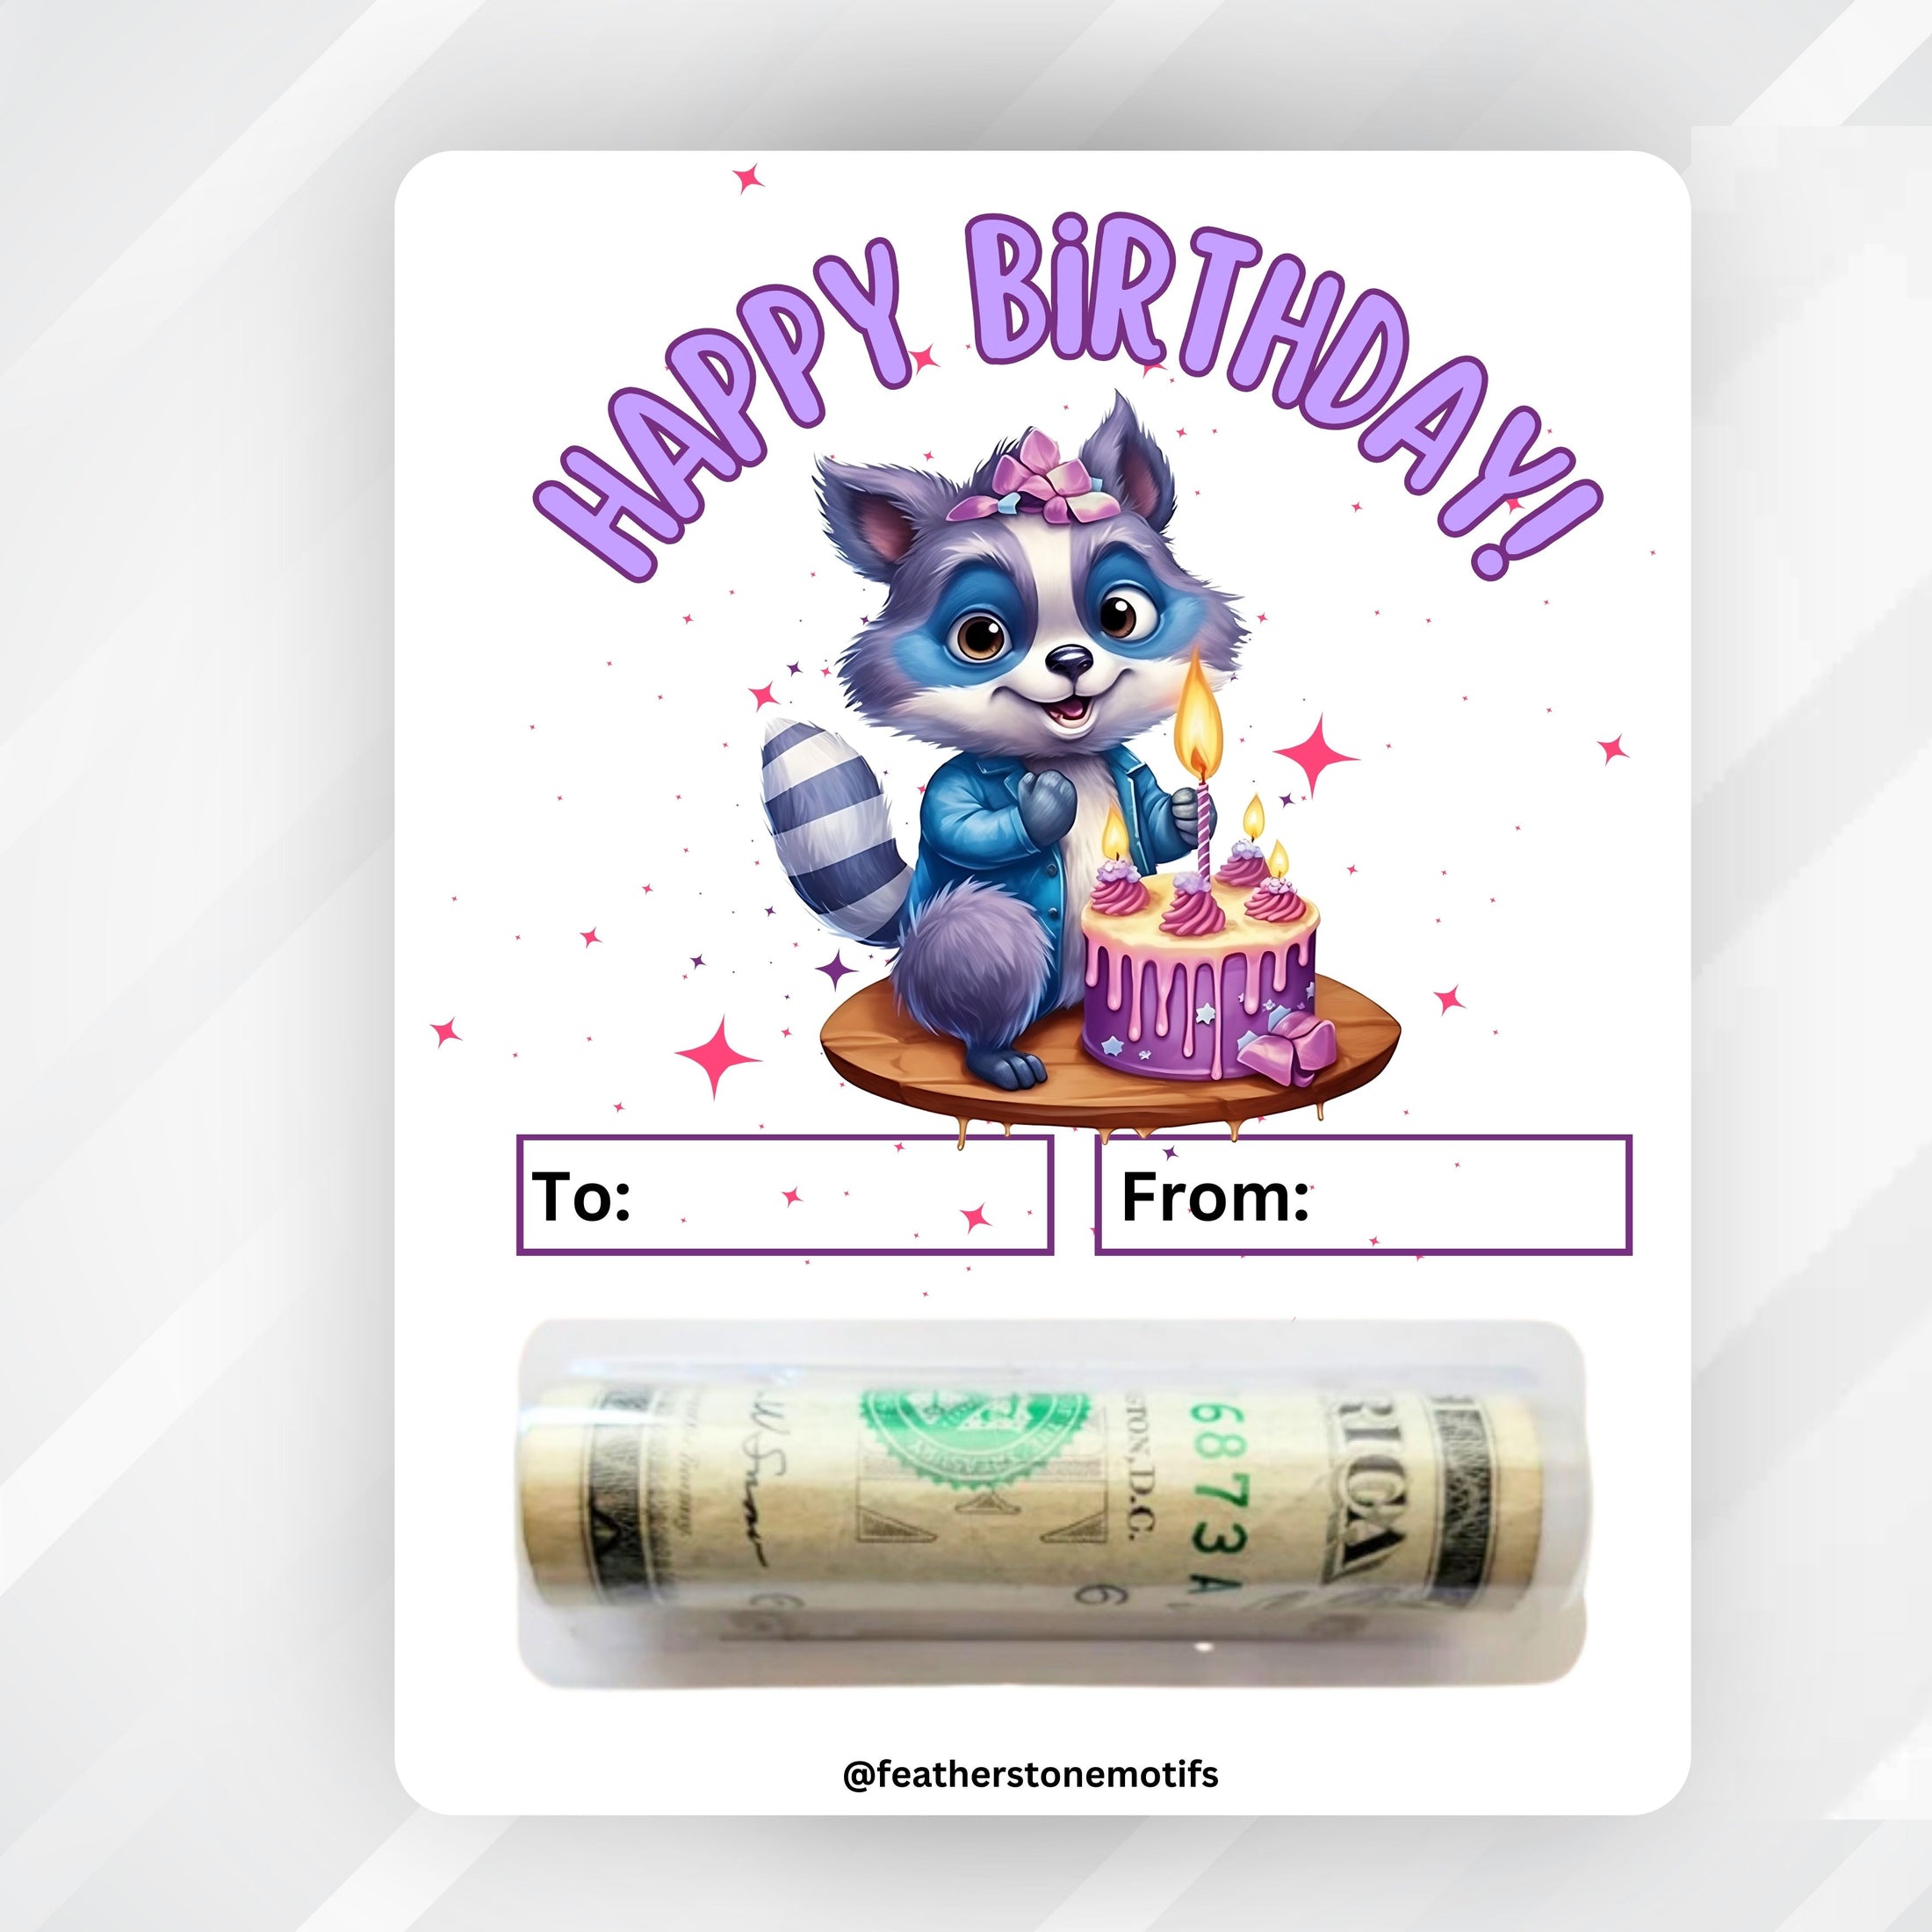 This image shows the money tube attached to the Raccoon Birthday money card.